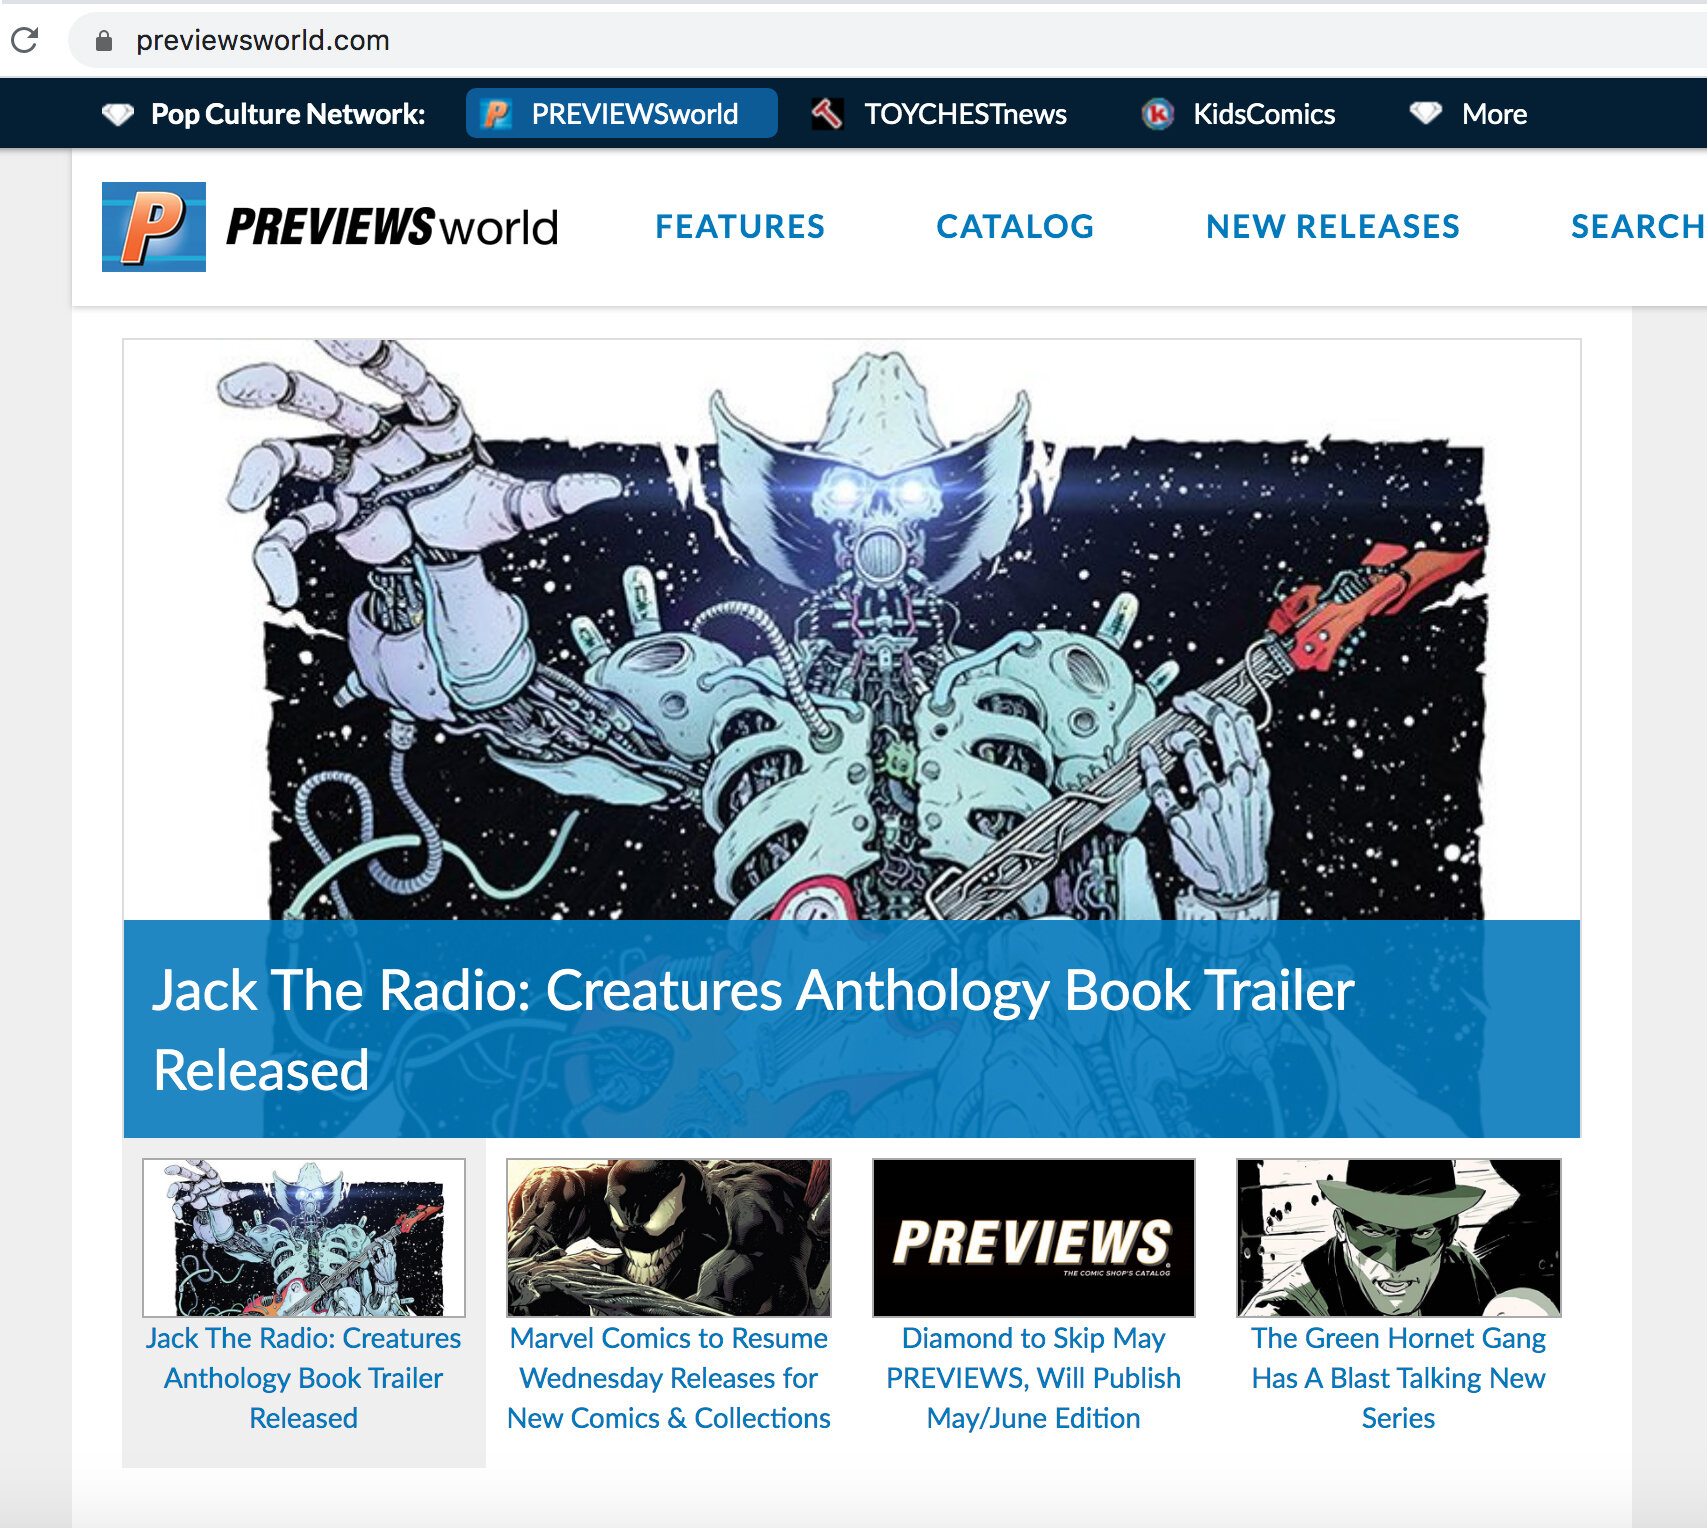 PreviewsWorld_JackTheRadio_Creatures_FRONTPAGE-20200505.jpg